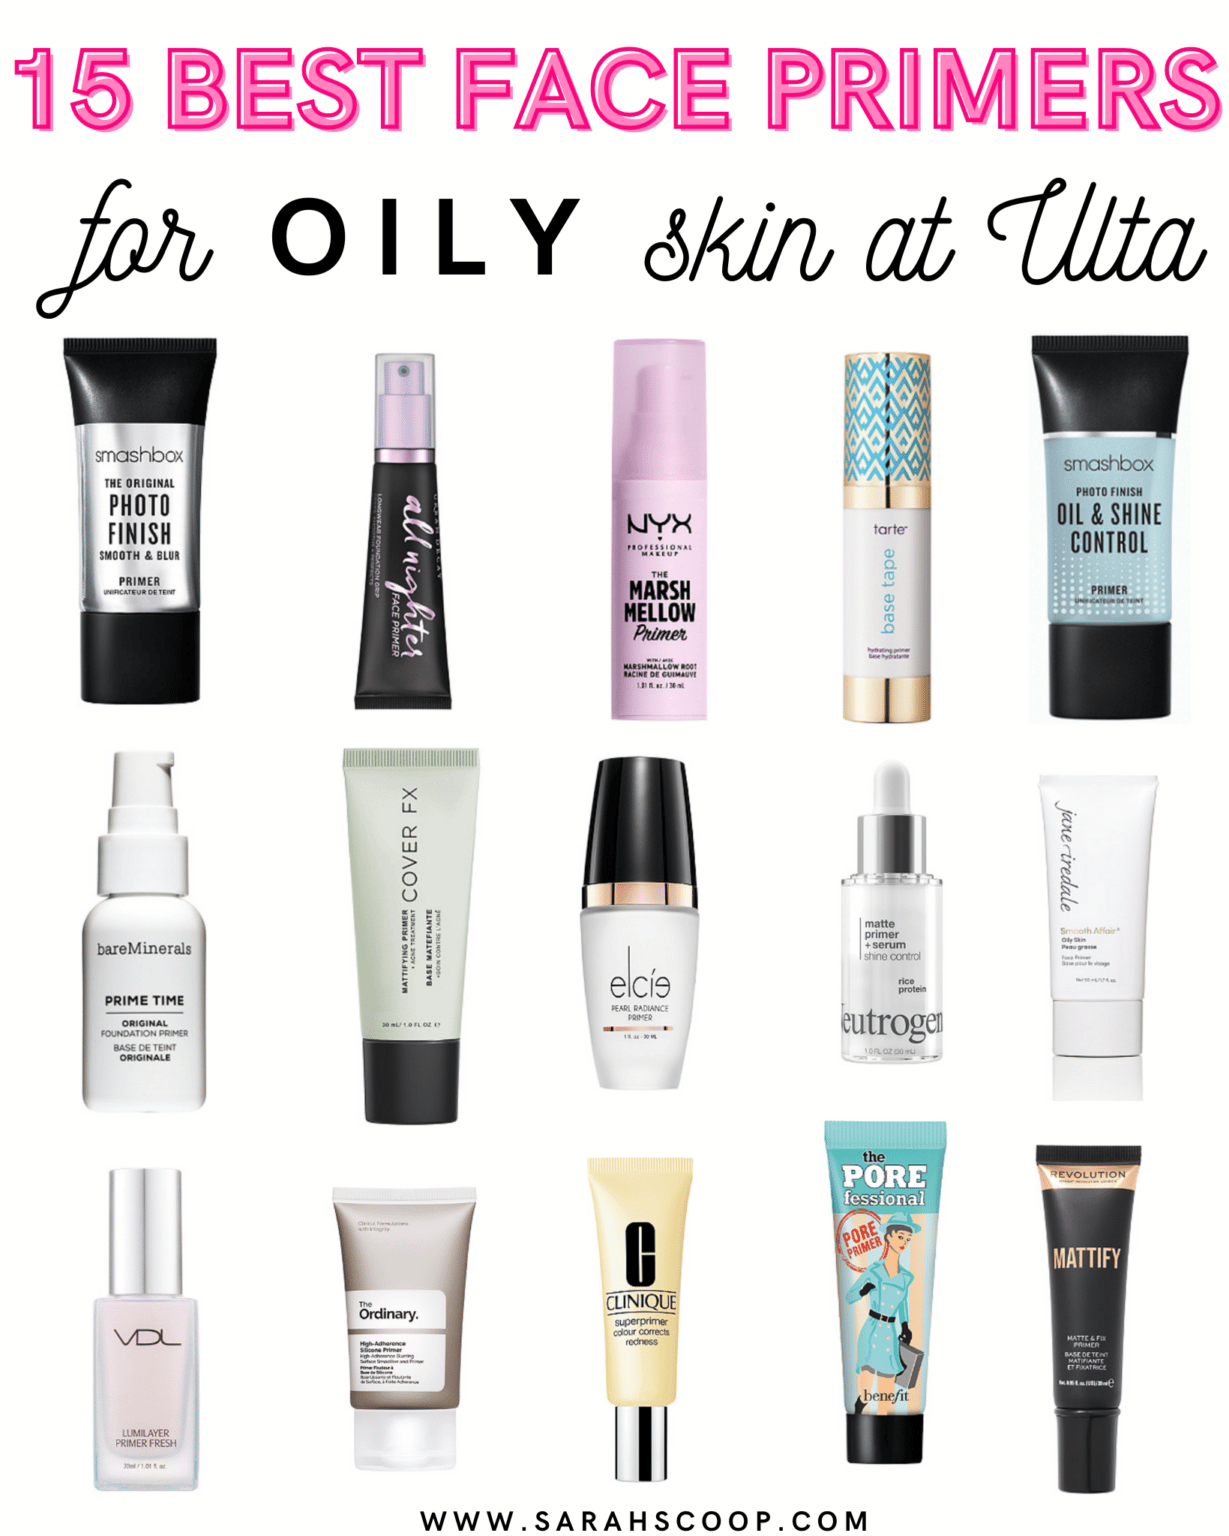 15 Best Face Primers For Oily Skin At Ulta